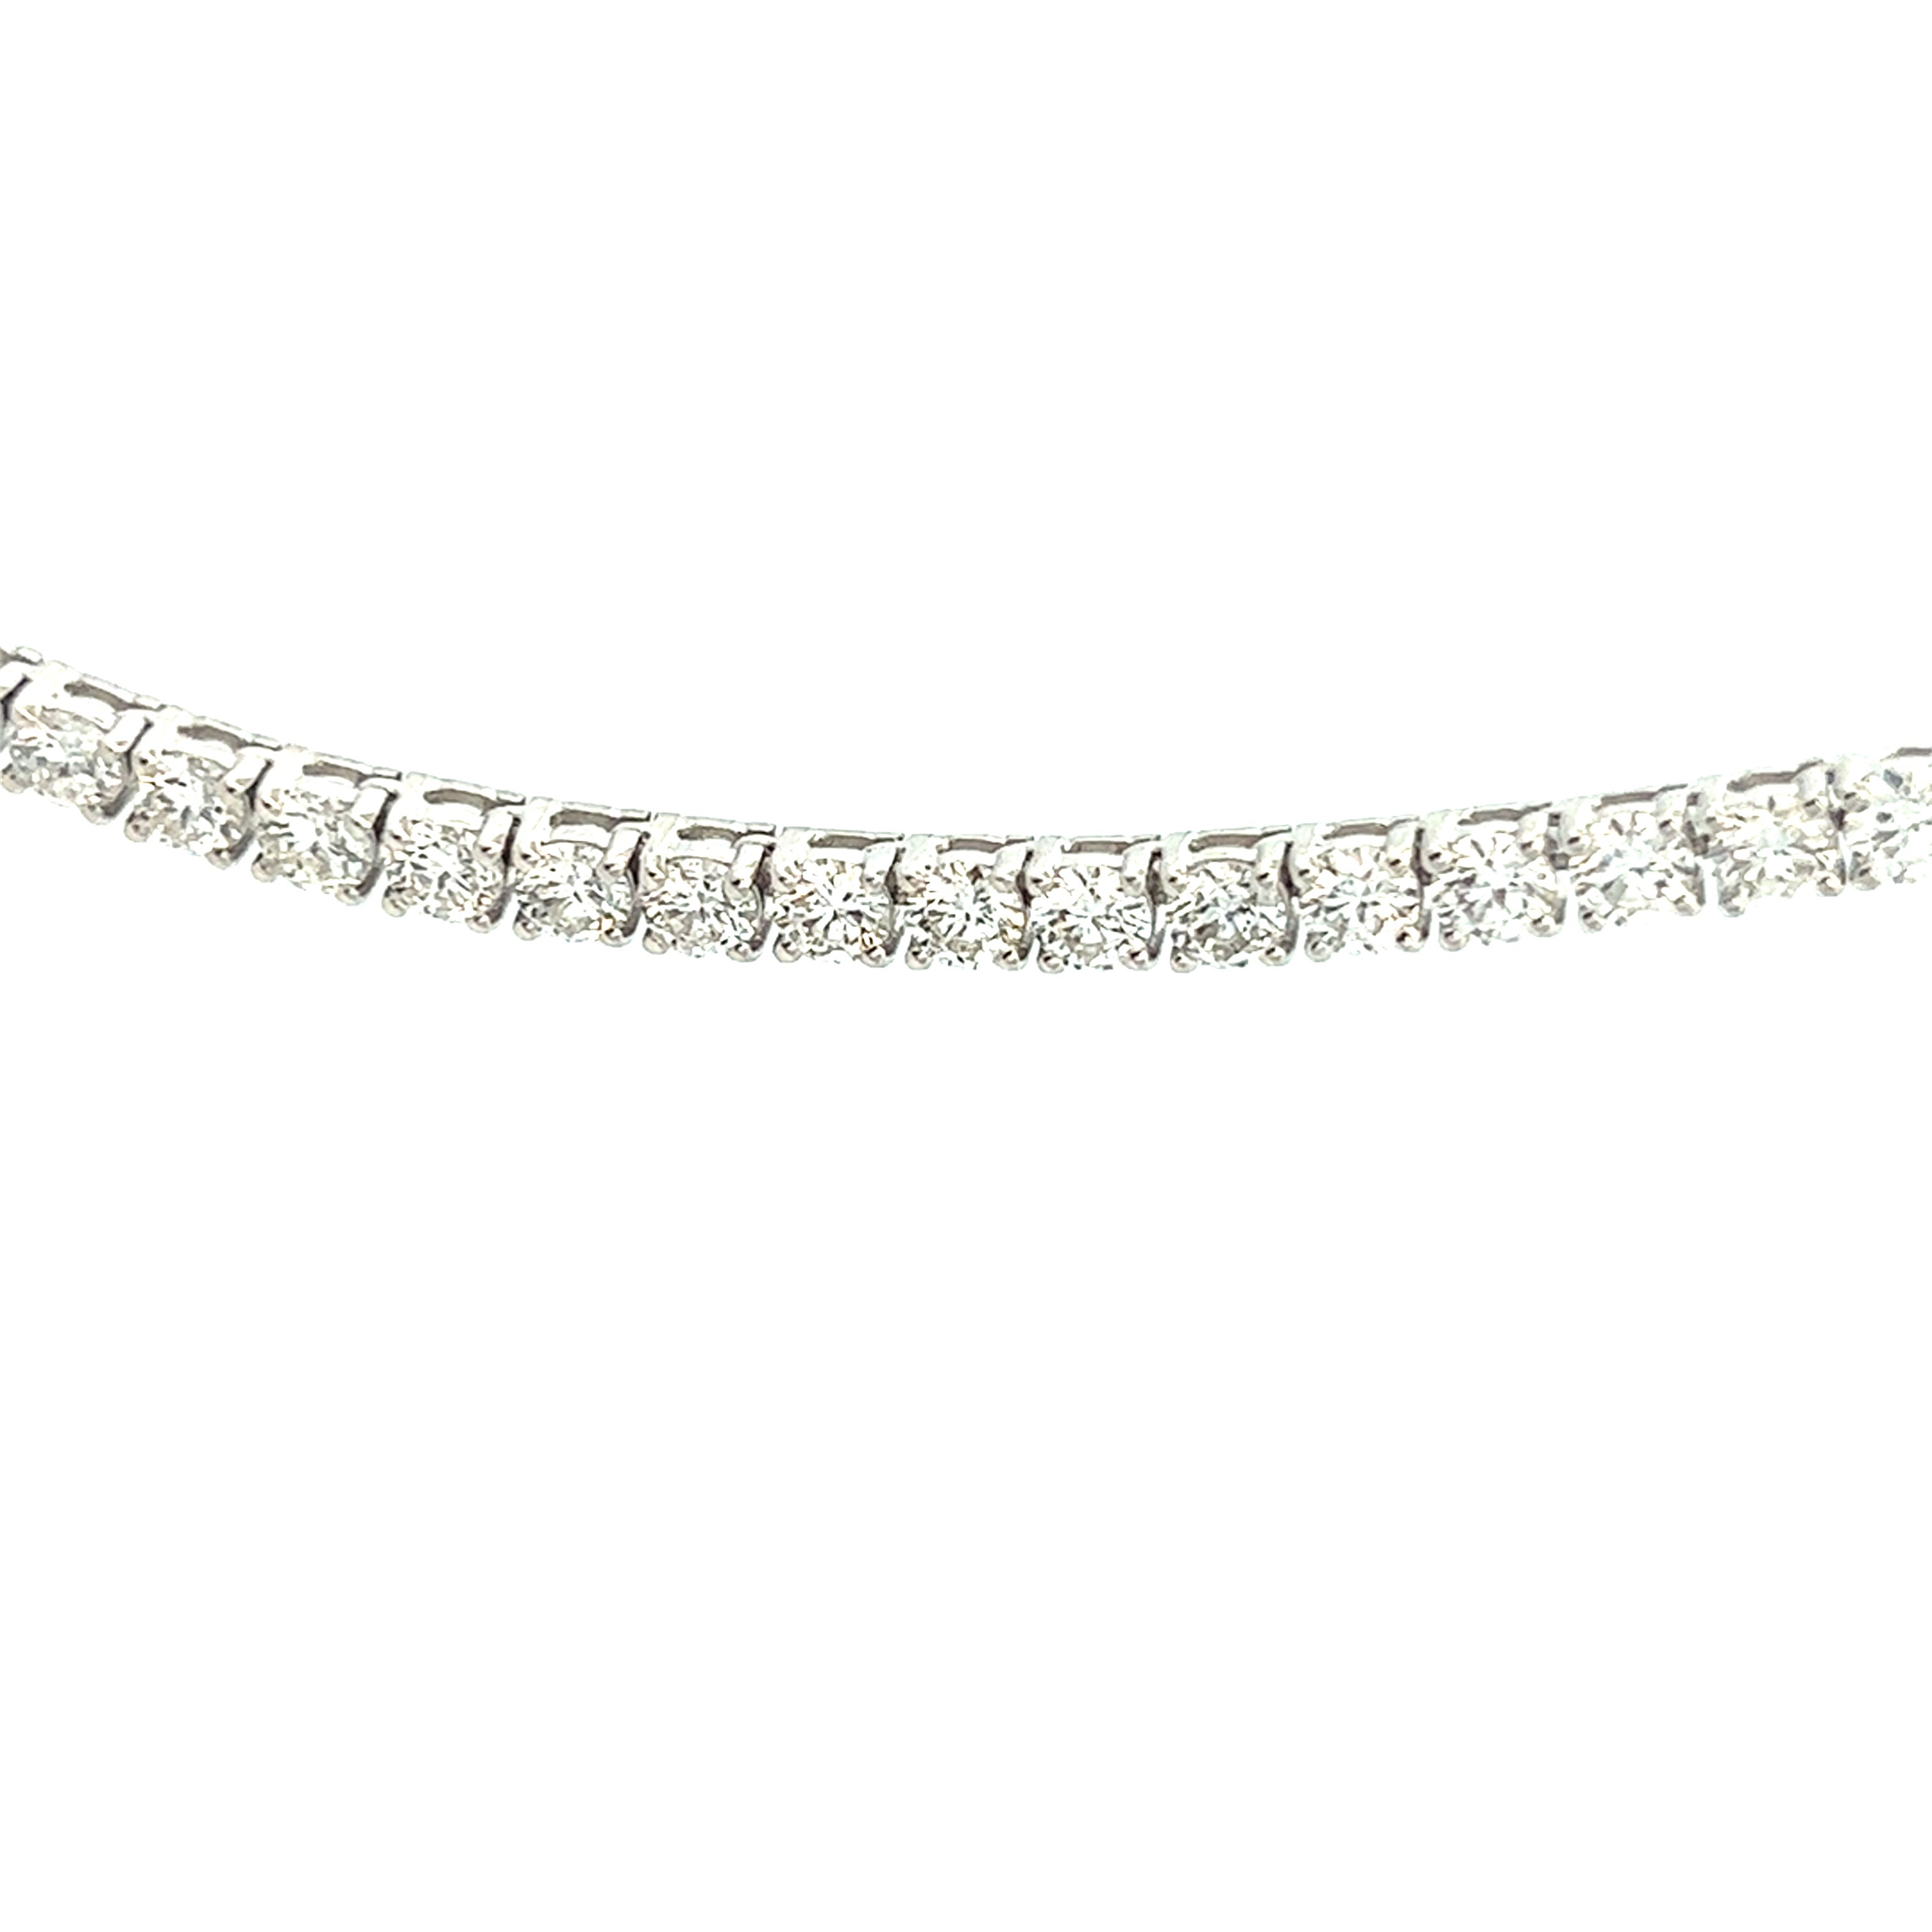 12 ct Round Diamond Graduated Tennis Necklace 3 Prong, 16 Inch - Necklaces